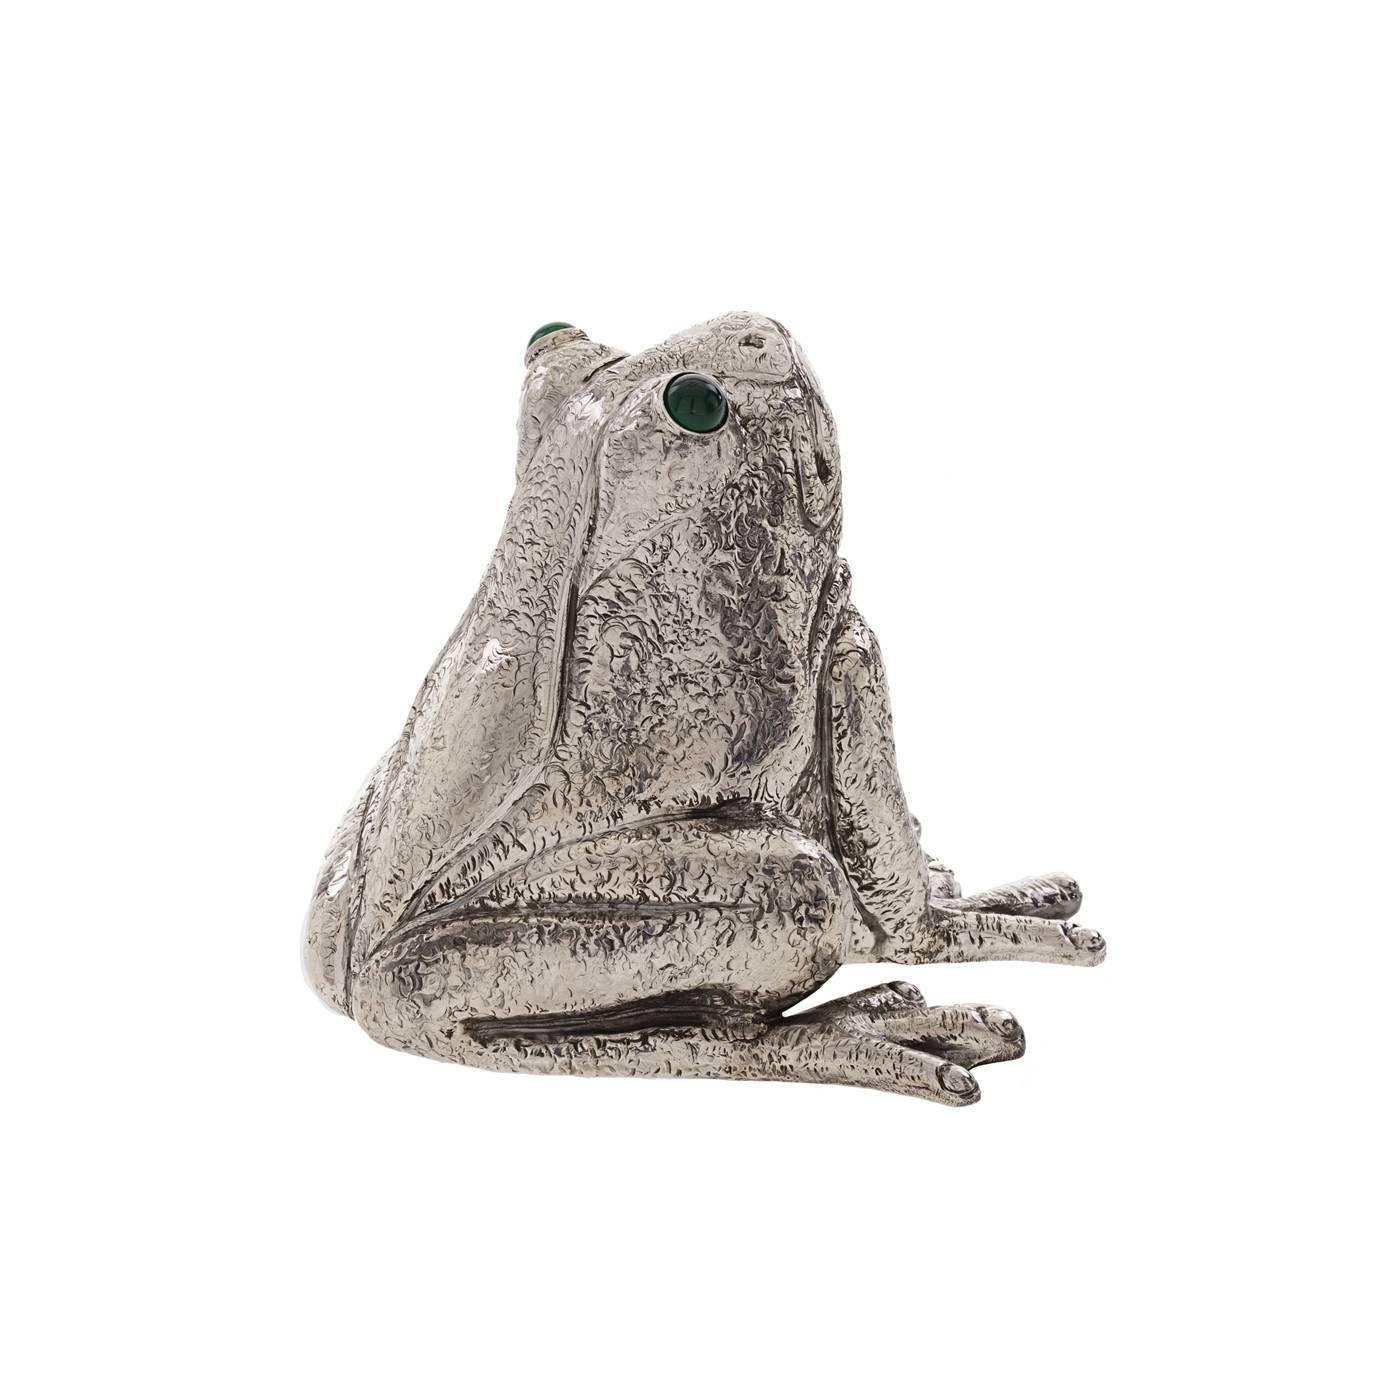 Playful true to life silver frog that serves as a lighter other than being a decorative piece of artwork. Expertly handmade by the Florentine silversmiths, the Lisi Brothers, its realism and expressive quality are quite uncanny.